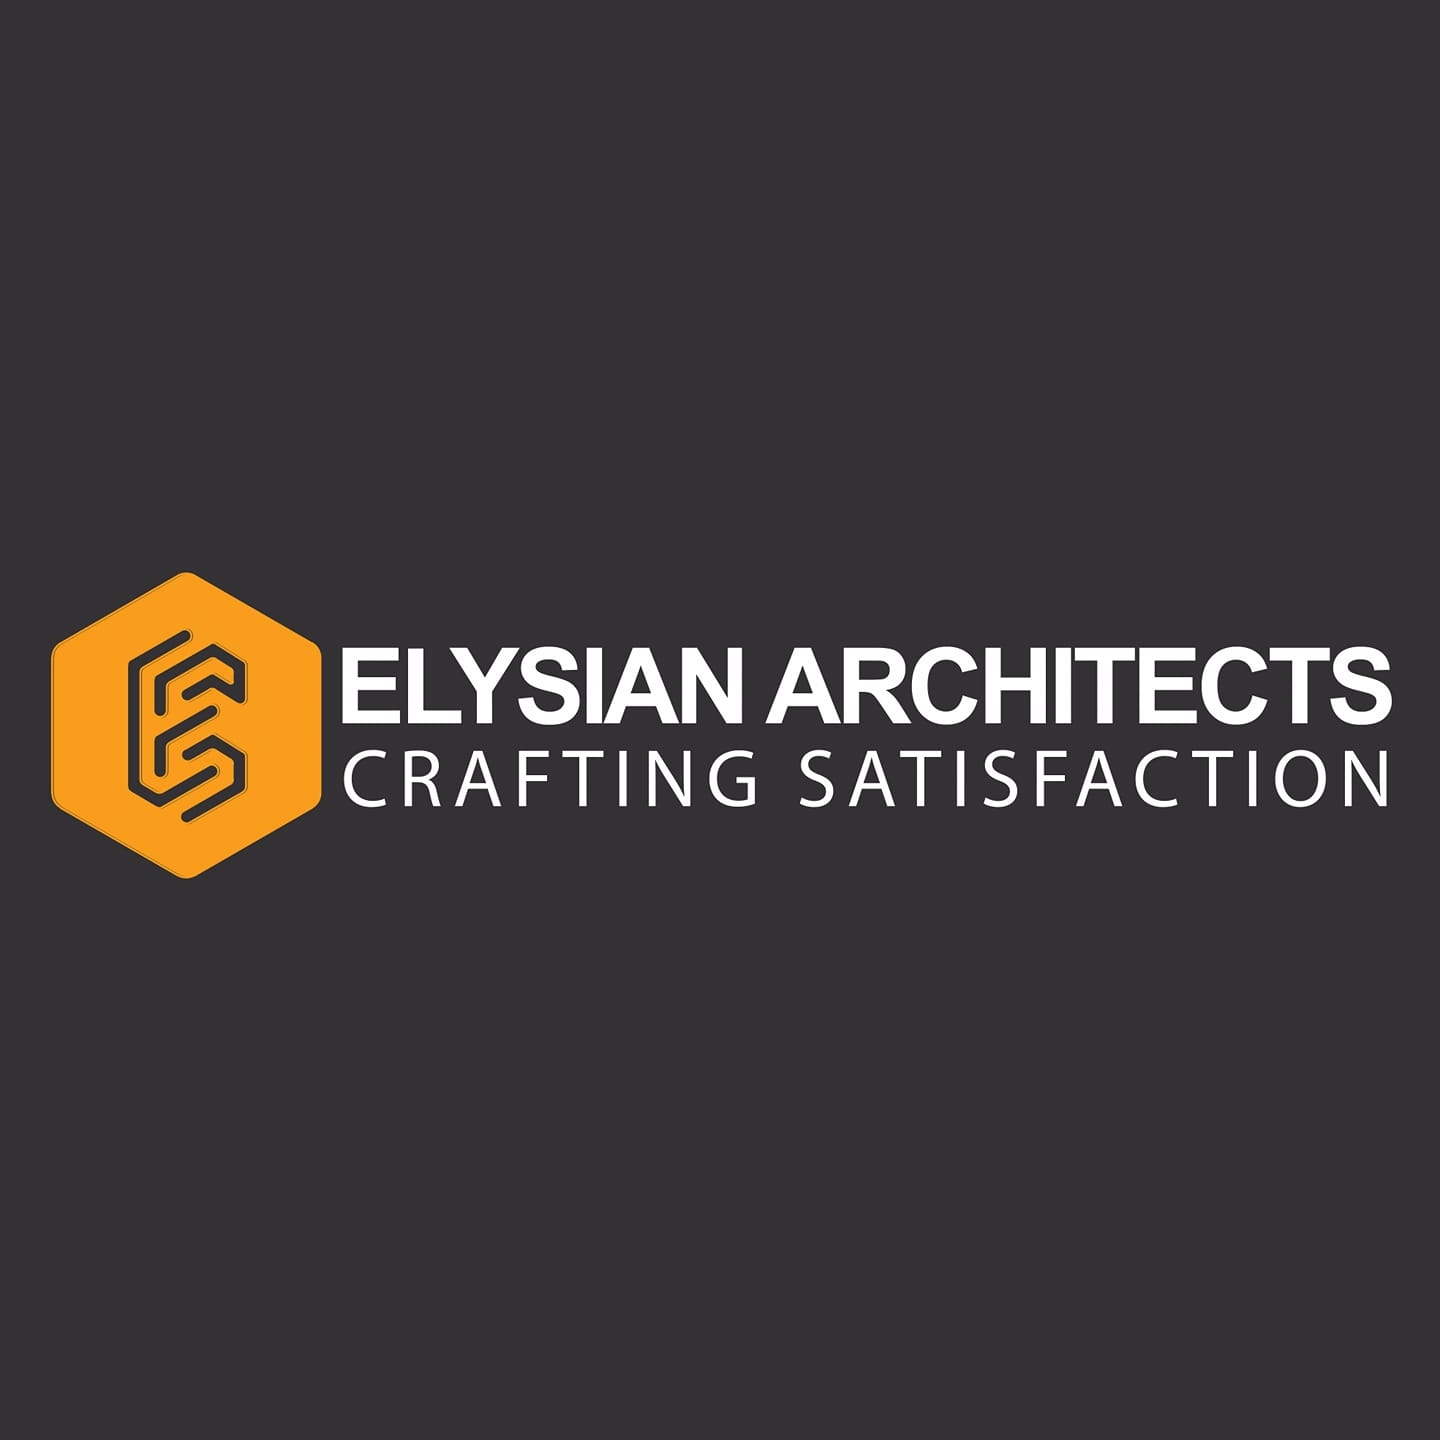 Elysian Architects|Legal Services|Professional Services